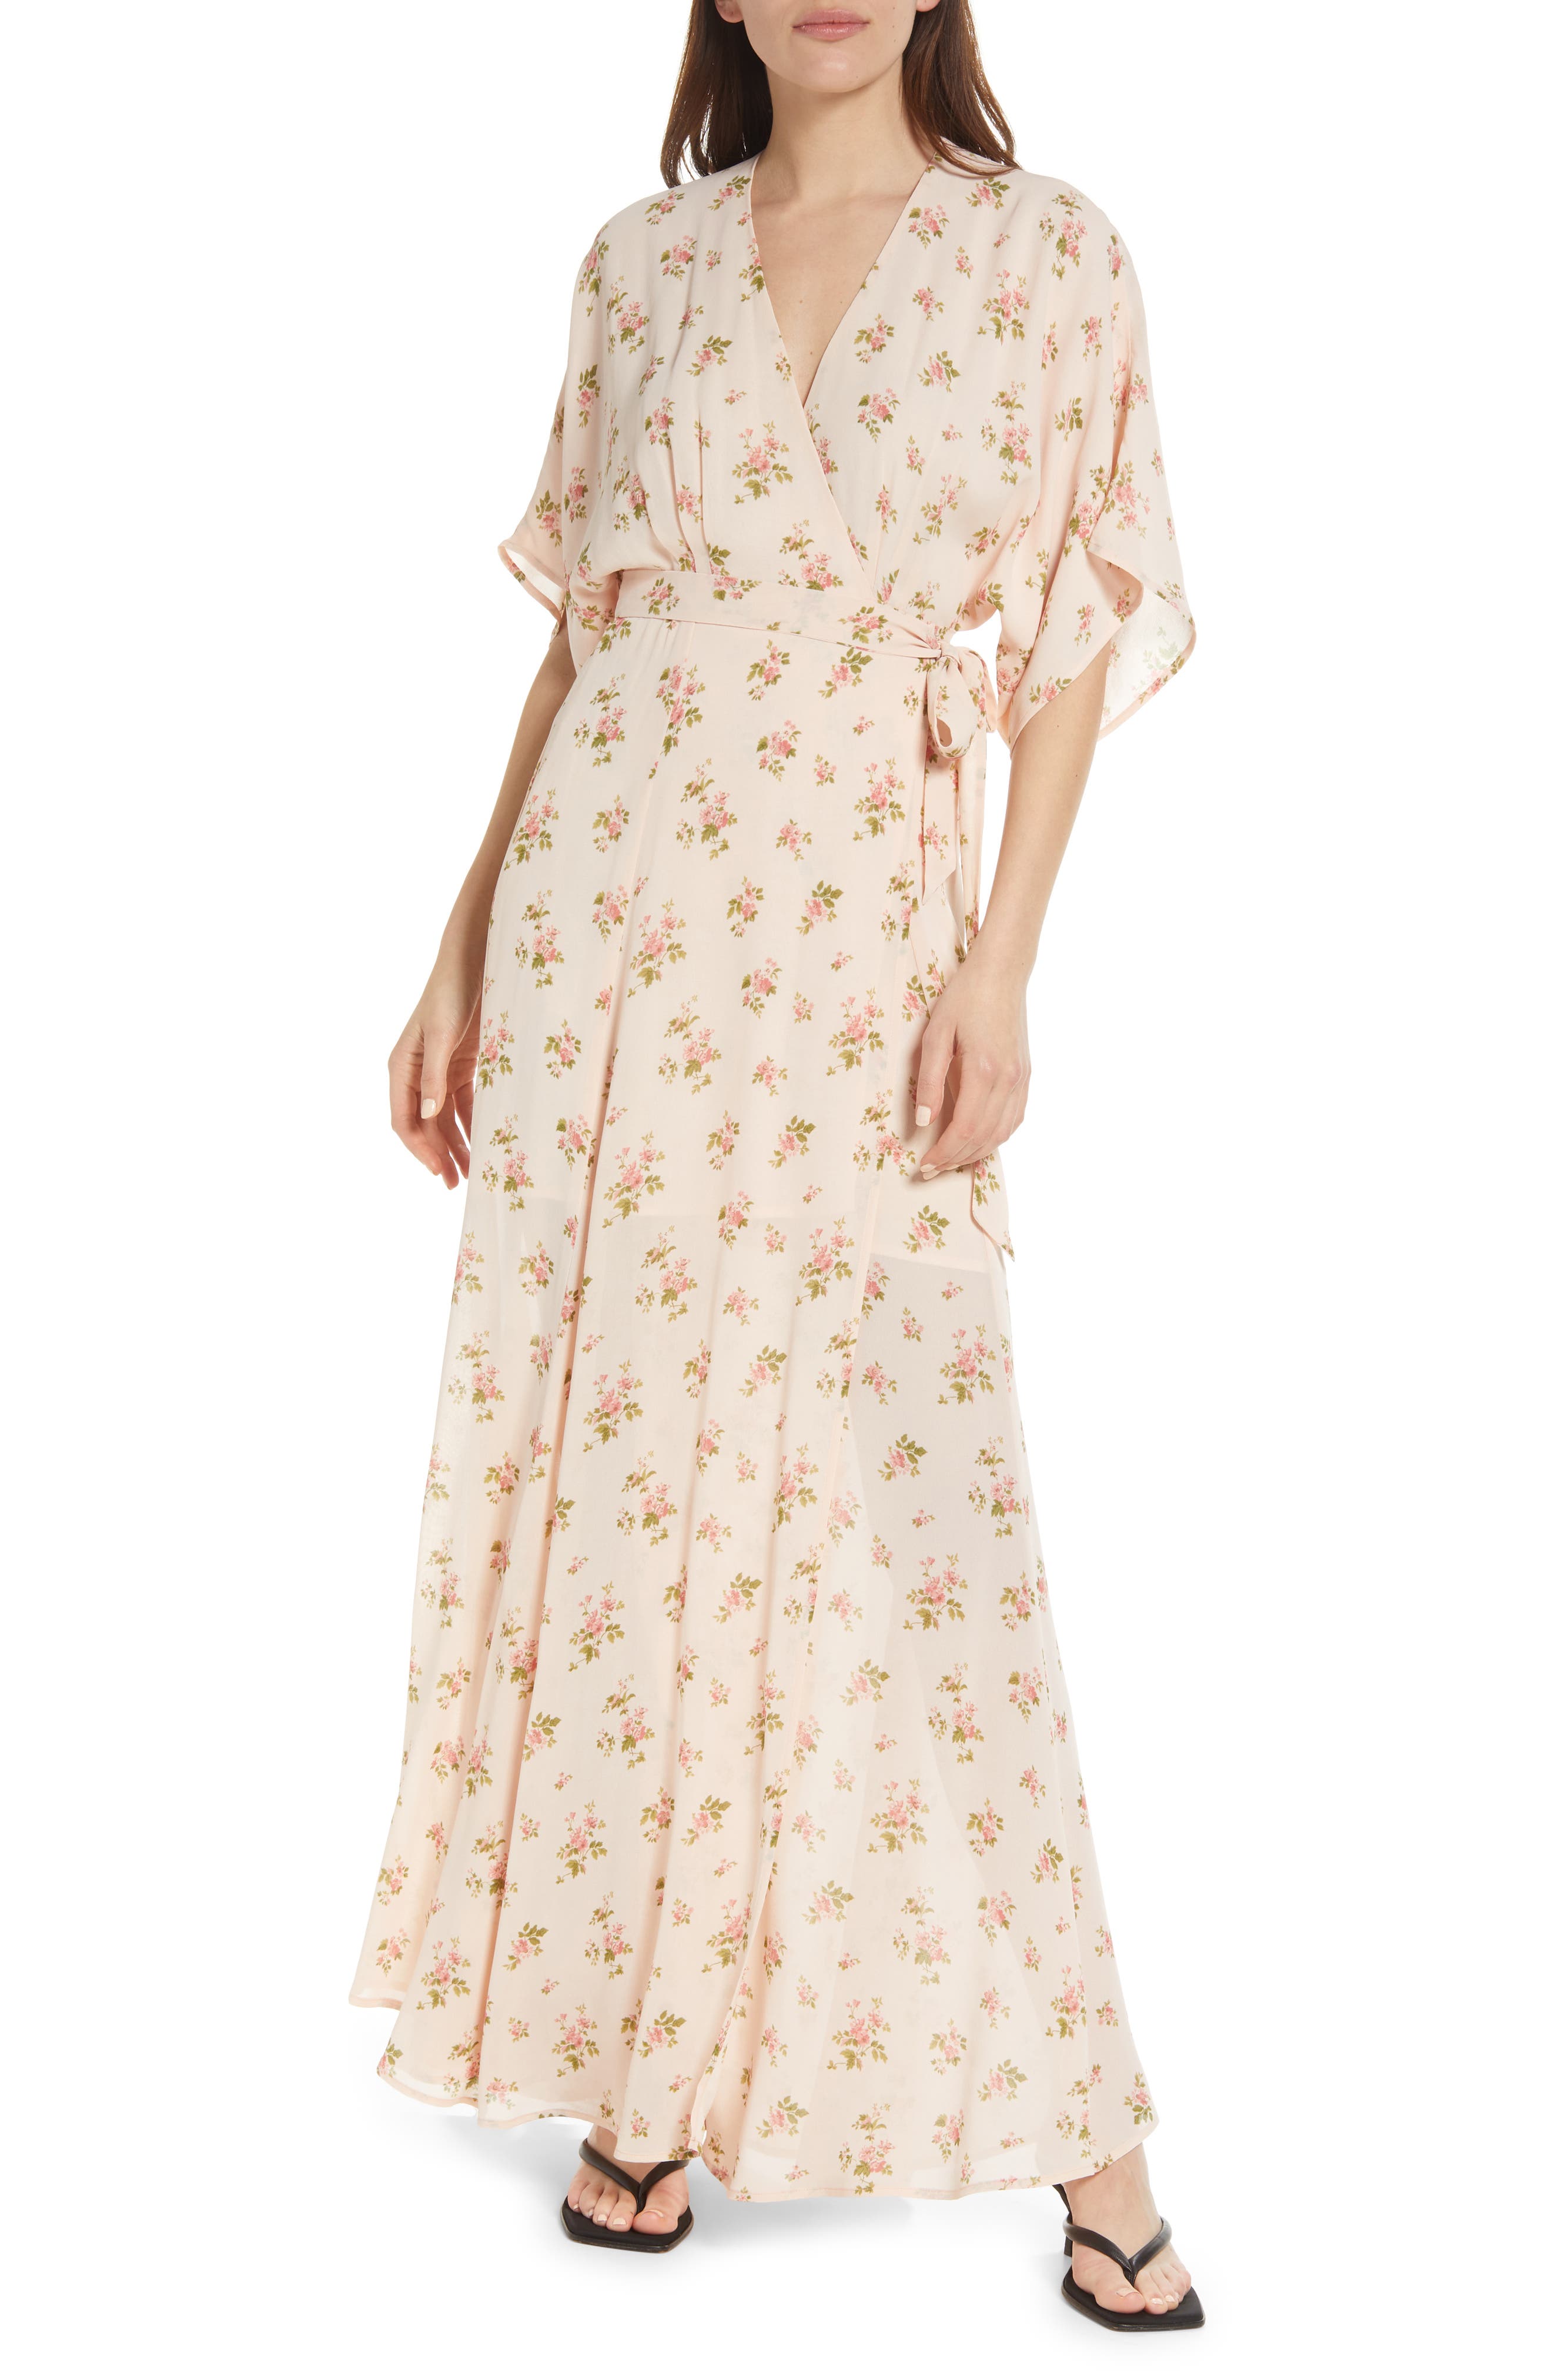 Reformation Winslow Maxi Dress in Audrey at Nordstrom, Size Large